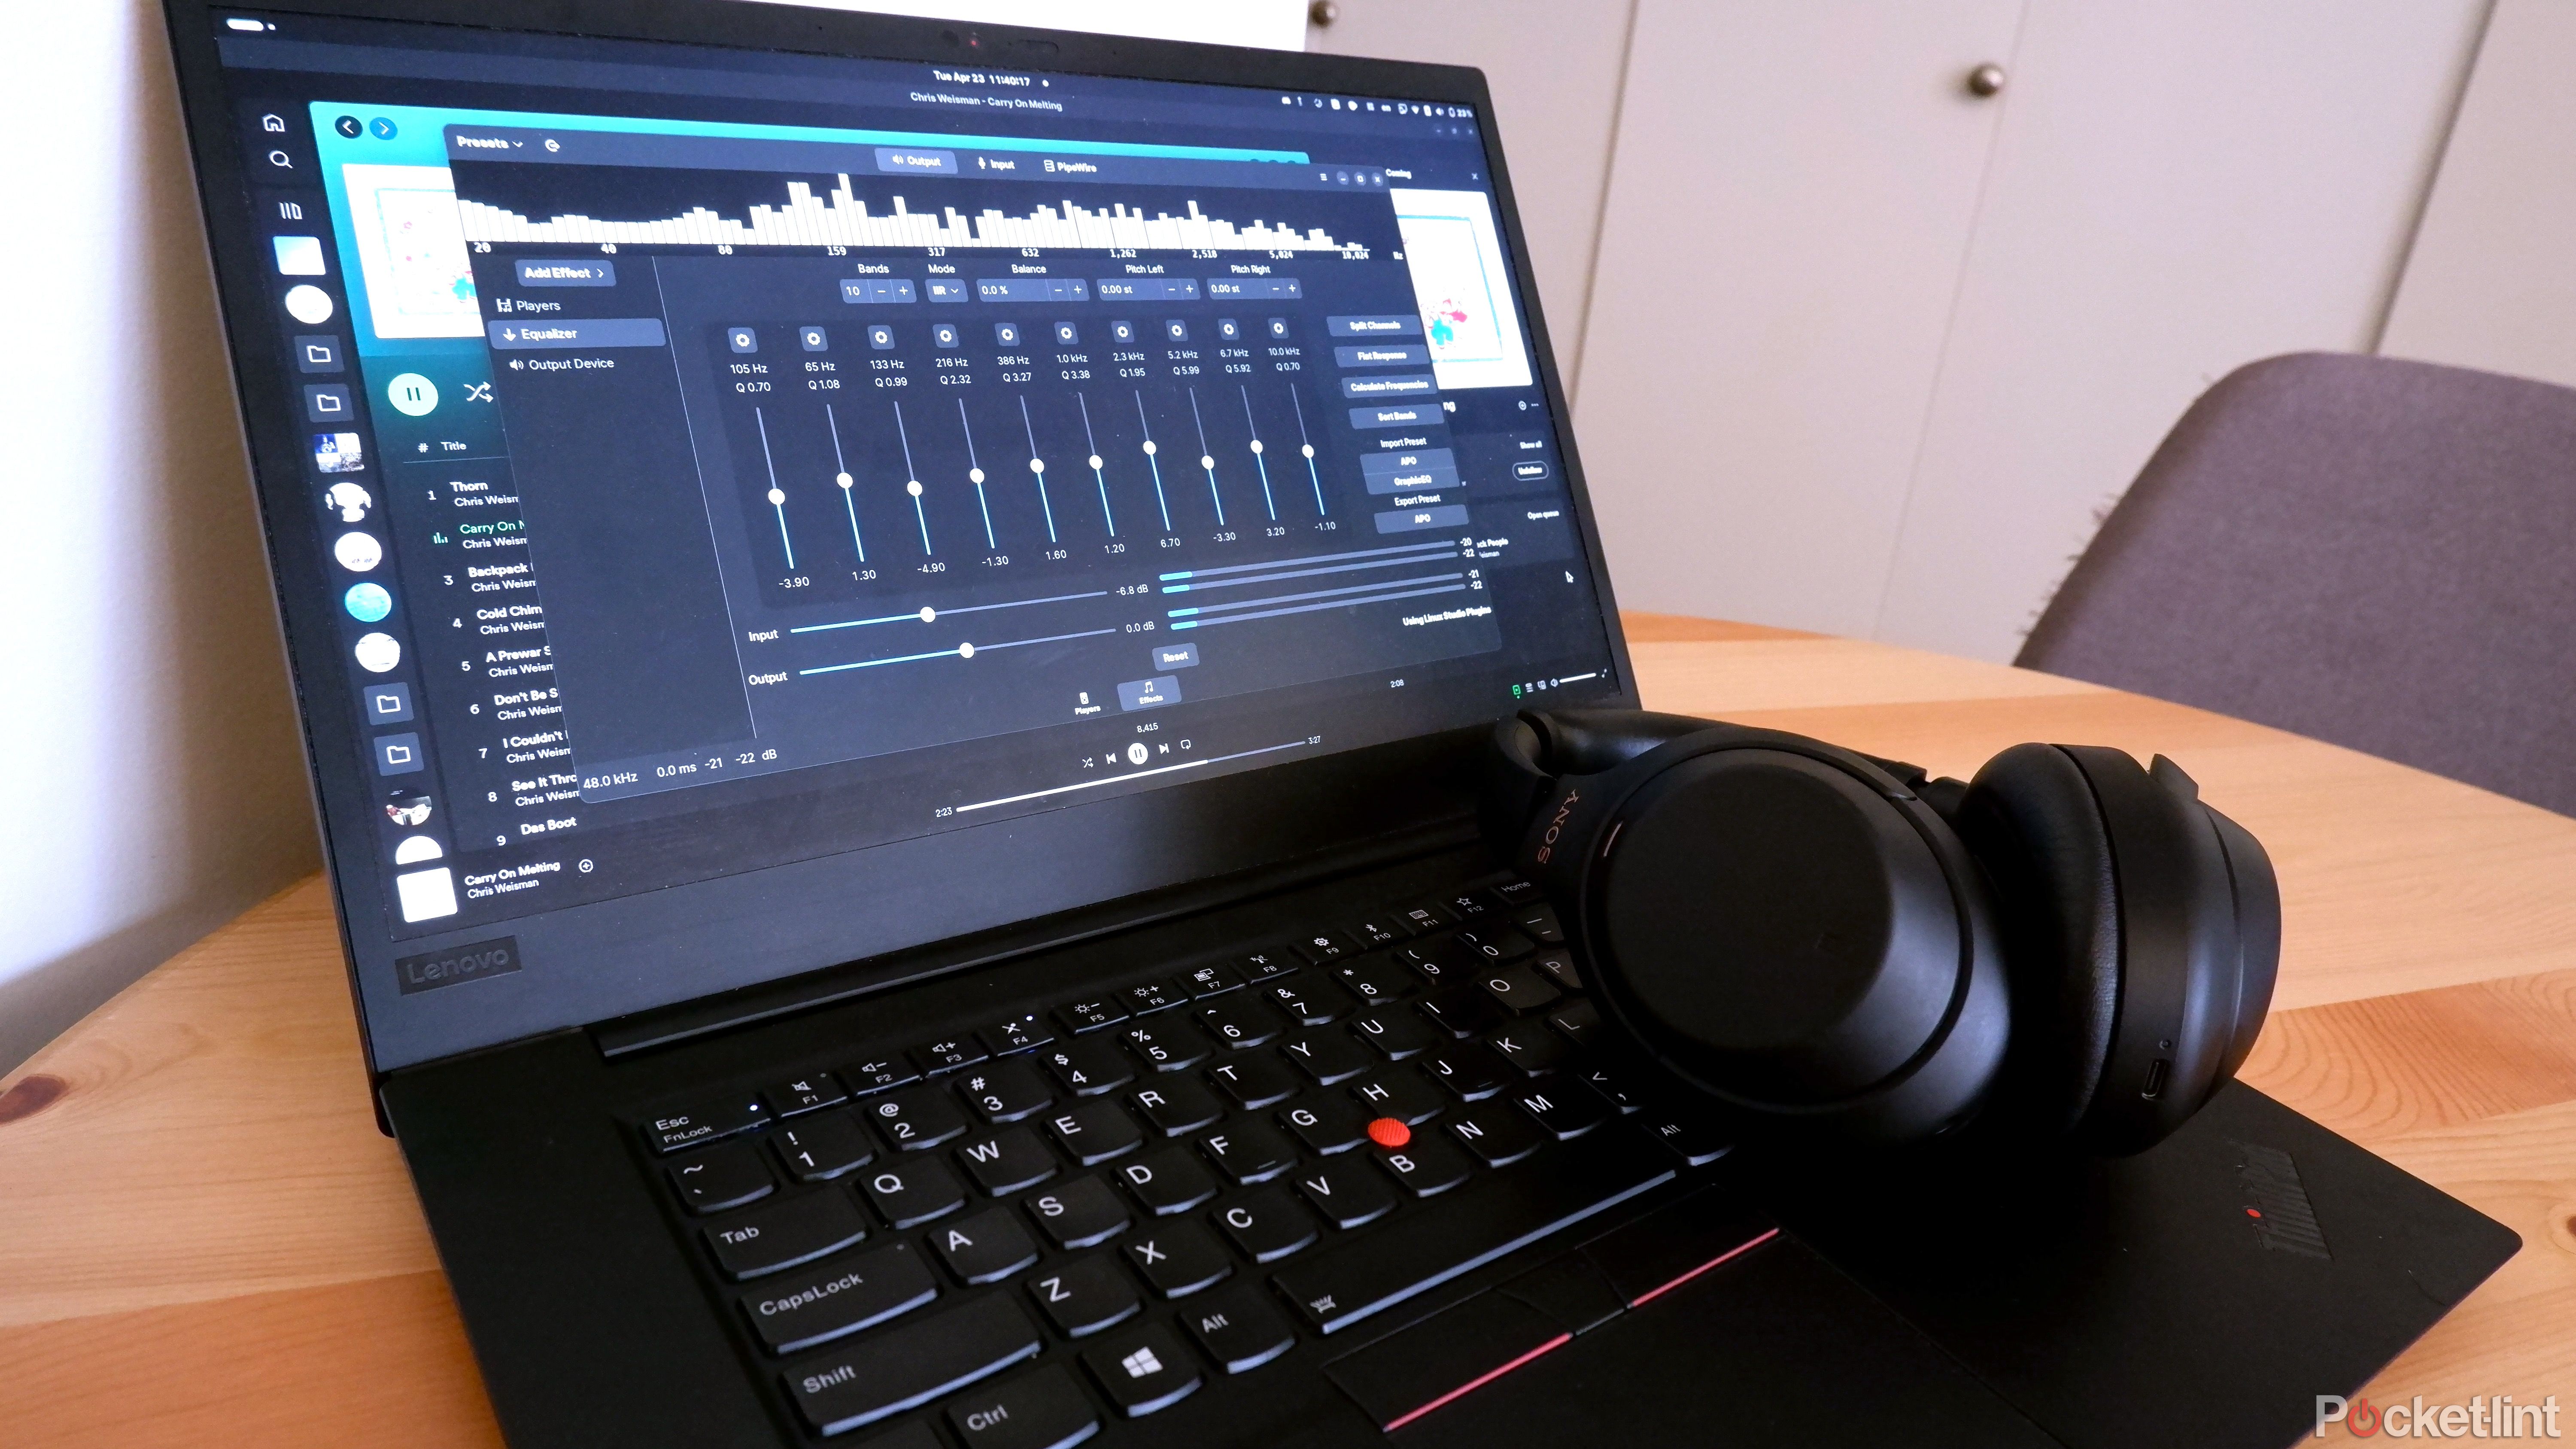 ThinkPad with an equalizer app open, with Sony WH-1000XM4 resting on the laptop